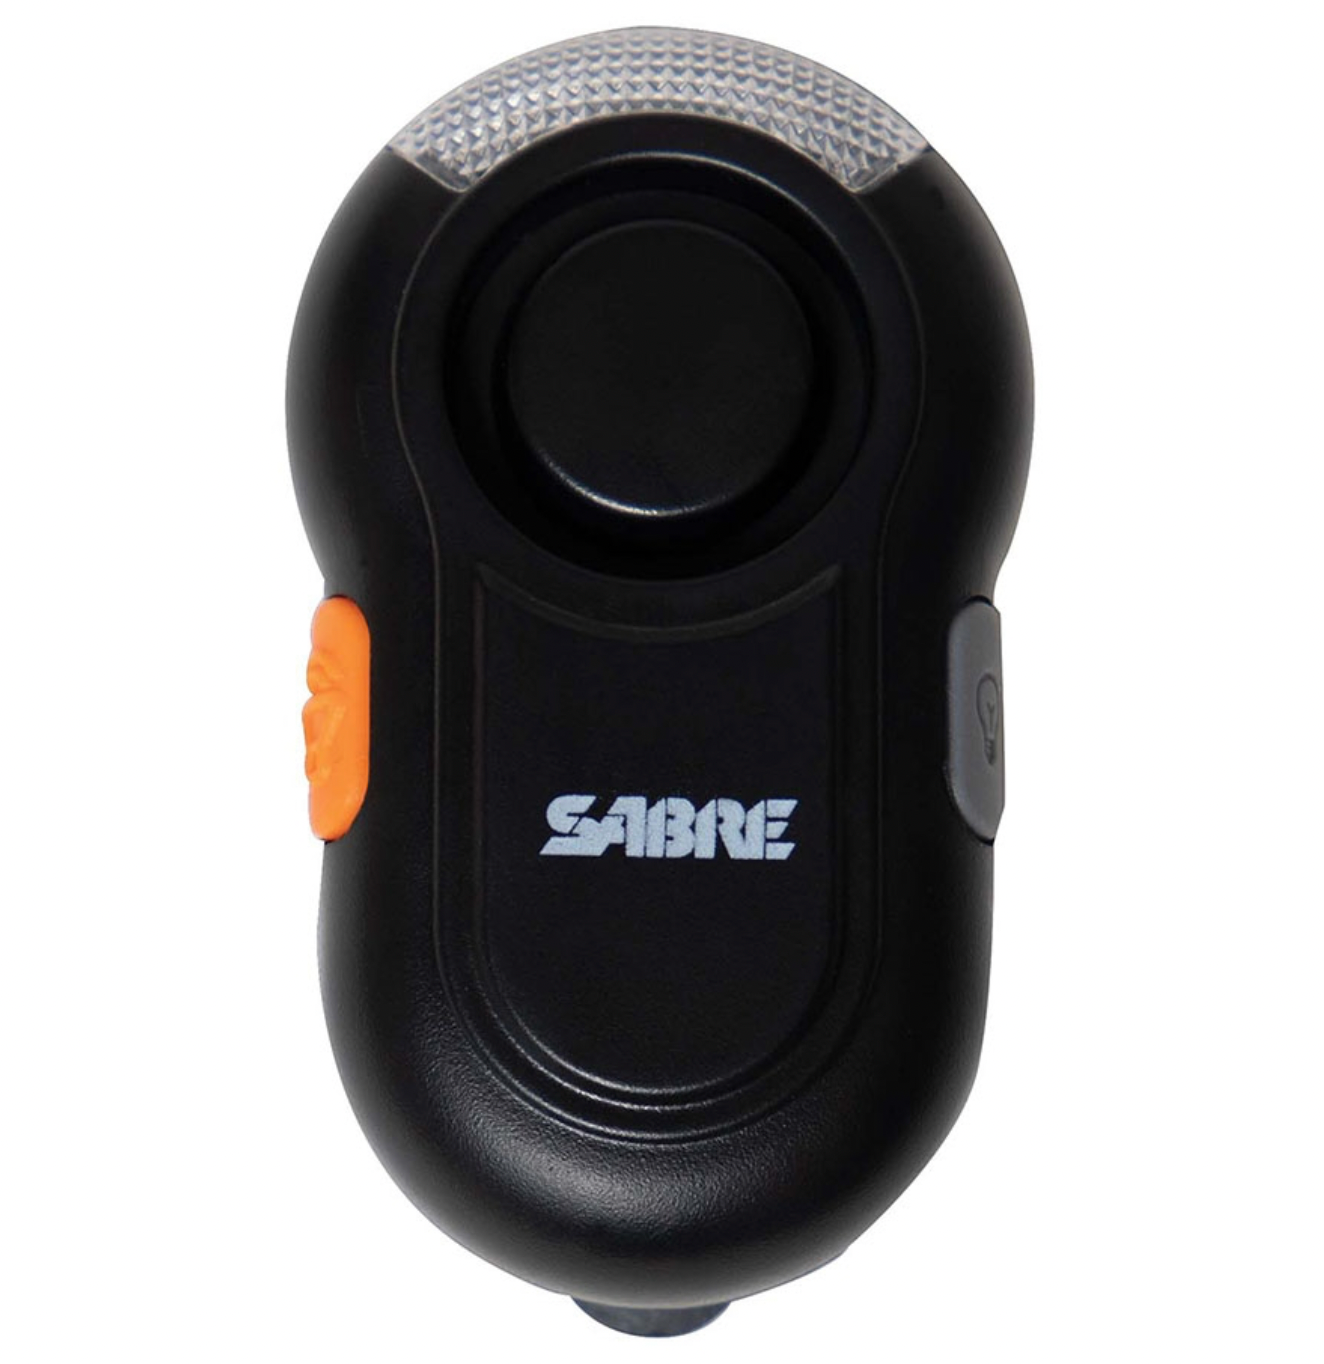 Sabre Personal Alarm With Clip and Led Light